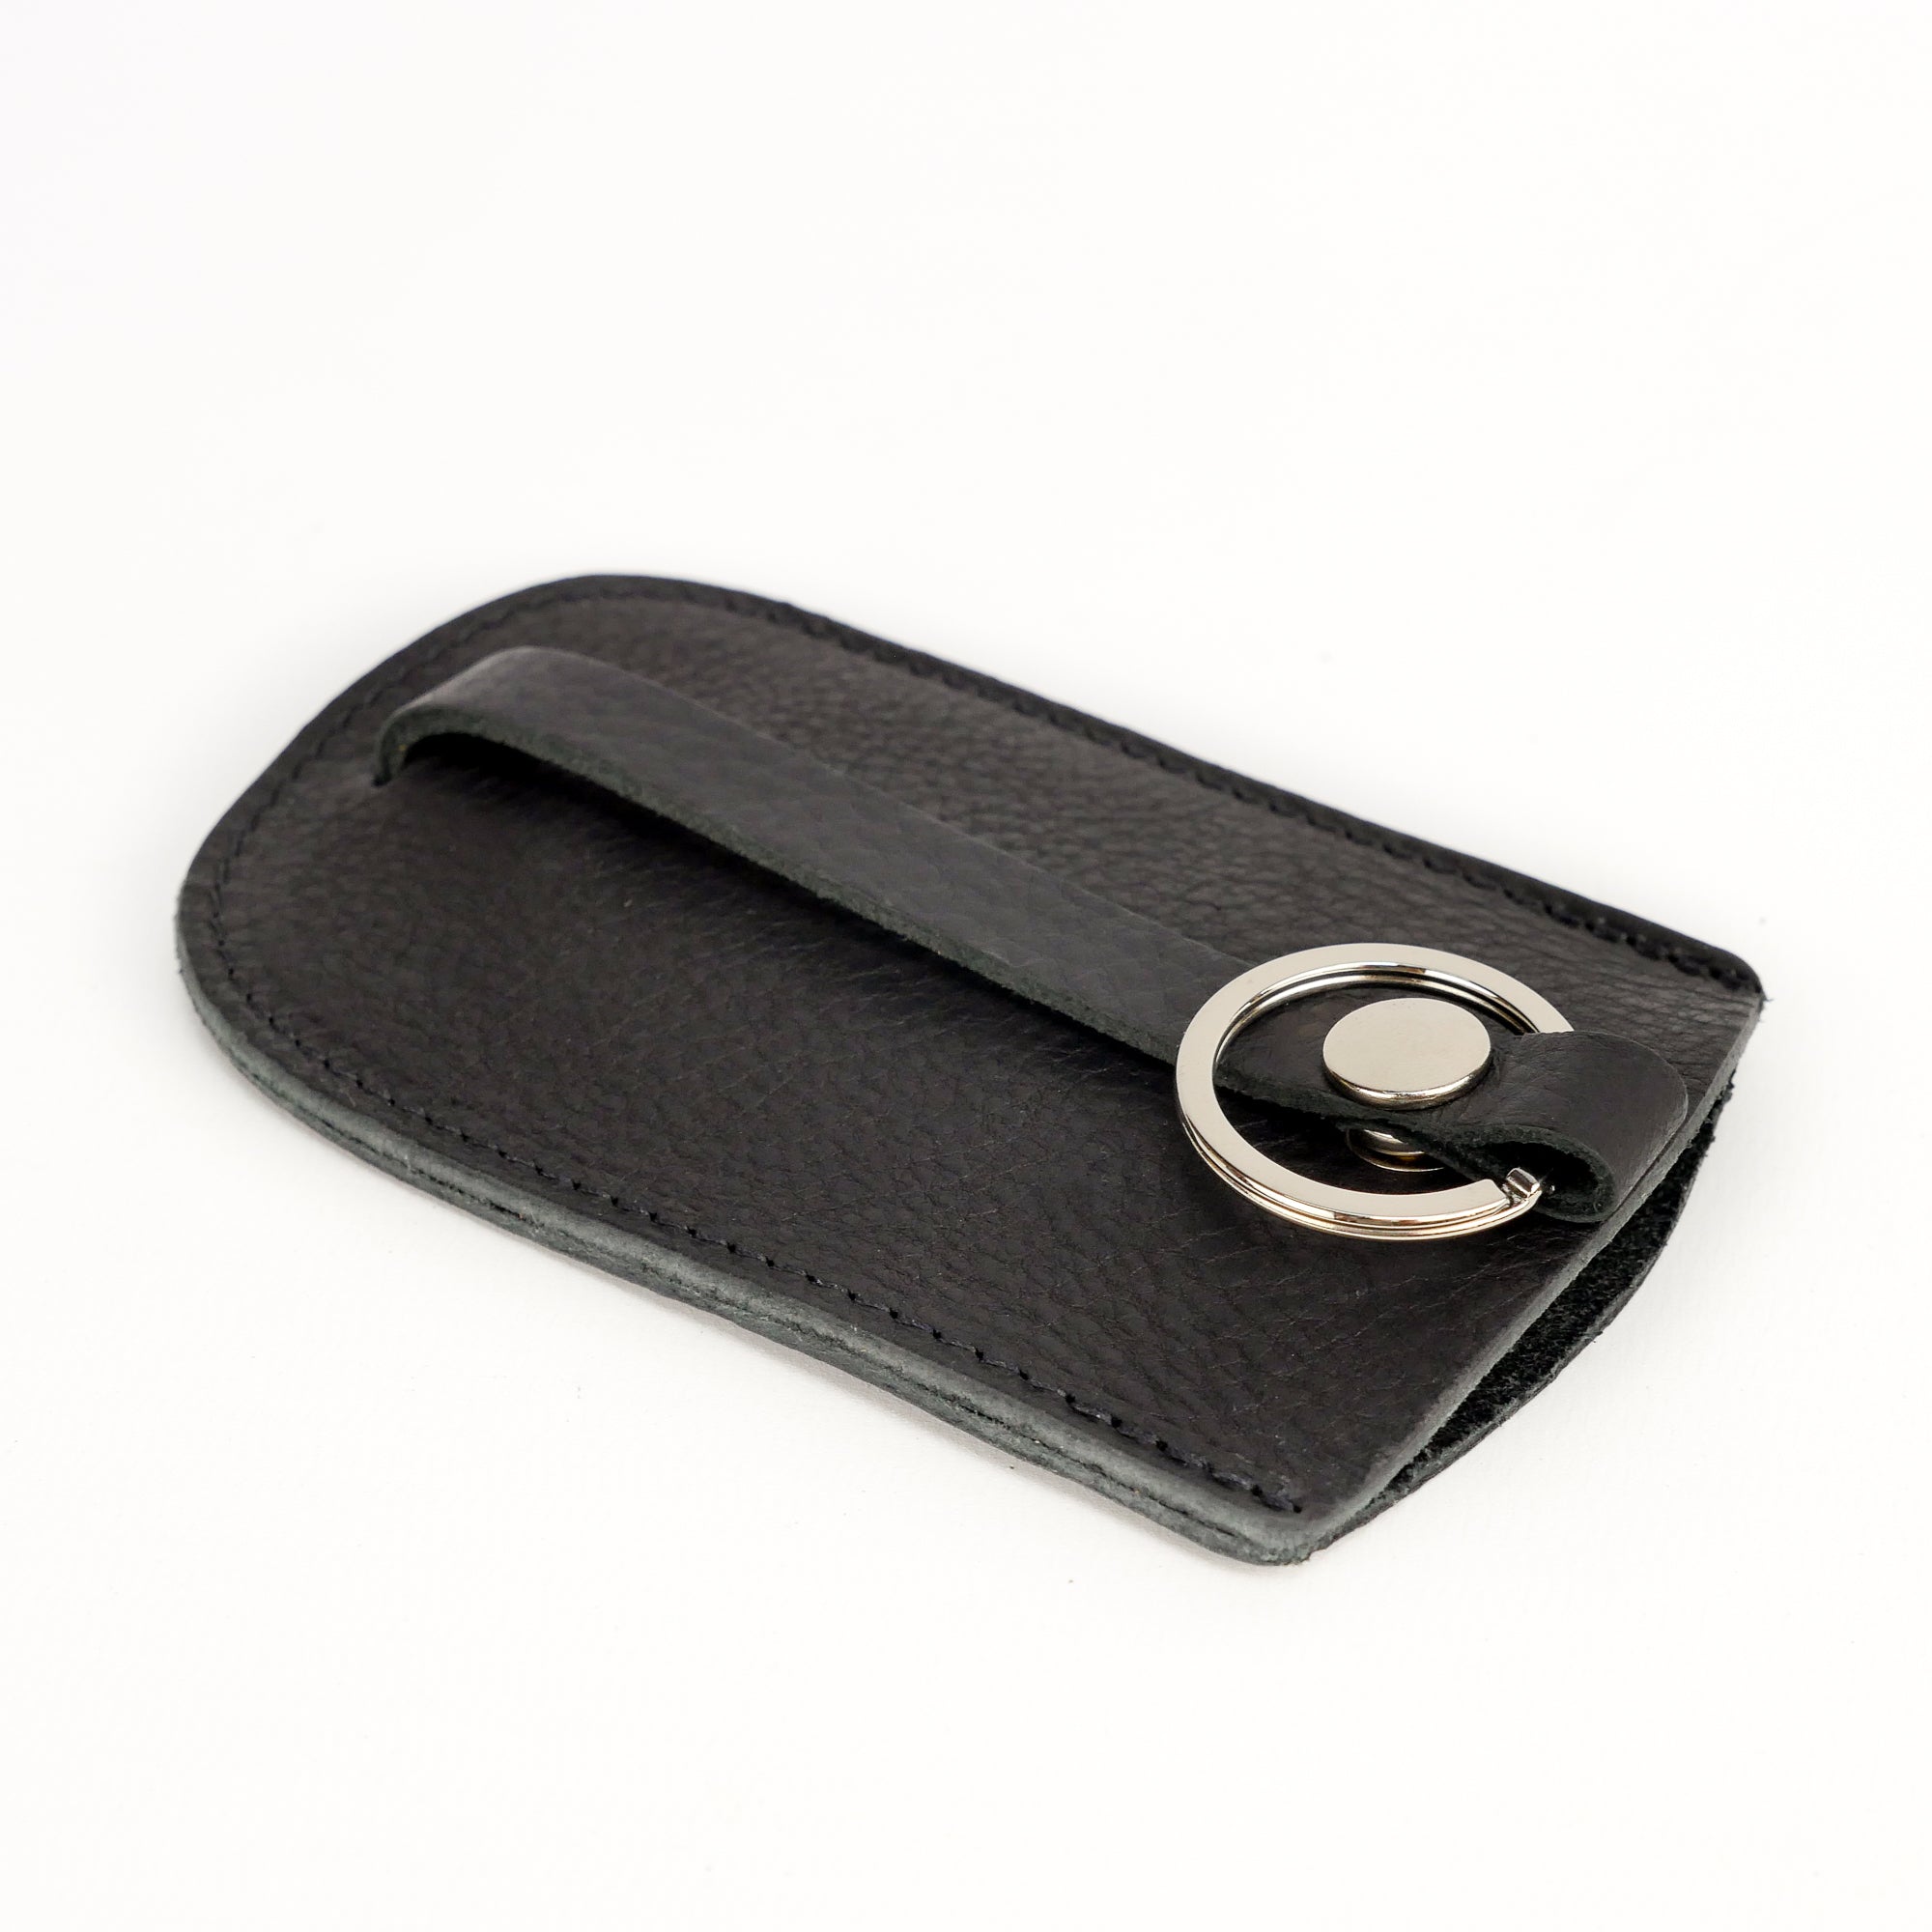 Black Leather Bell Key Holder, Luxury Leather Key Pouch